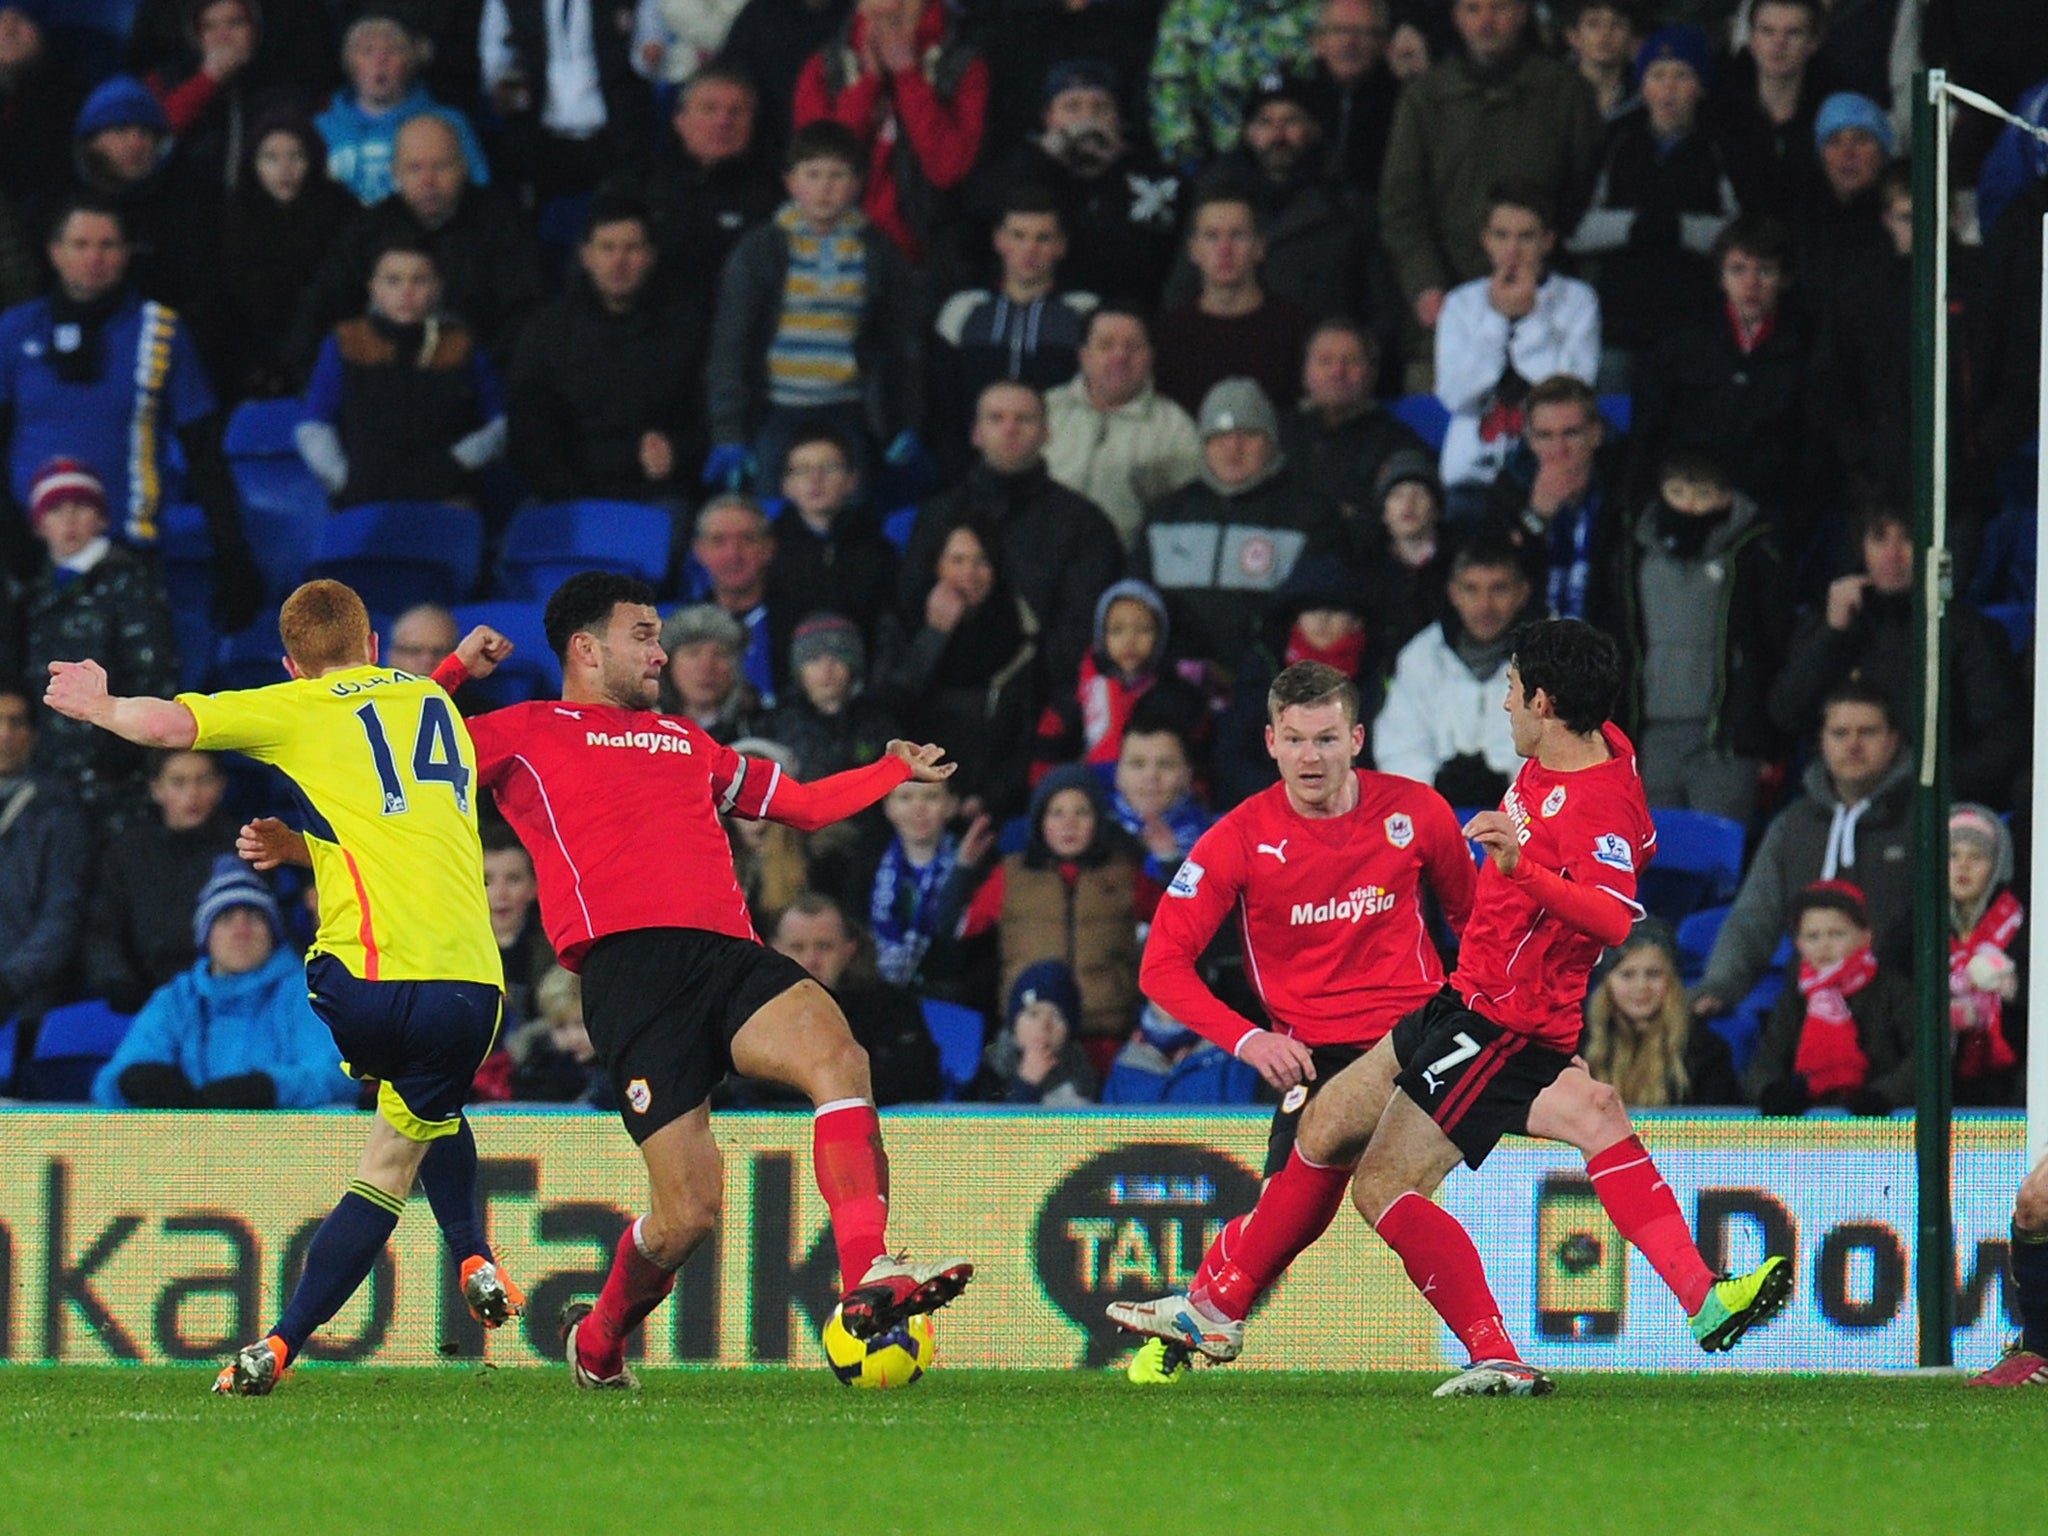 Jack in the box: Jack Colback fires in the second Sunderland goal in injury time at the Cardiff City Stadium